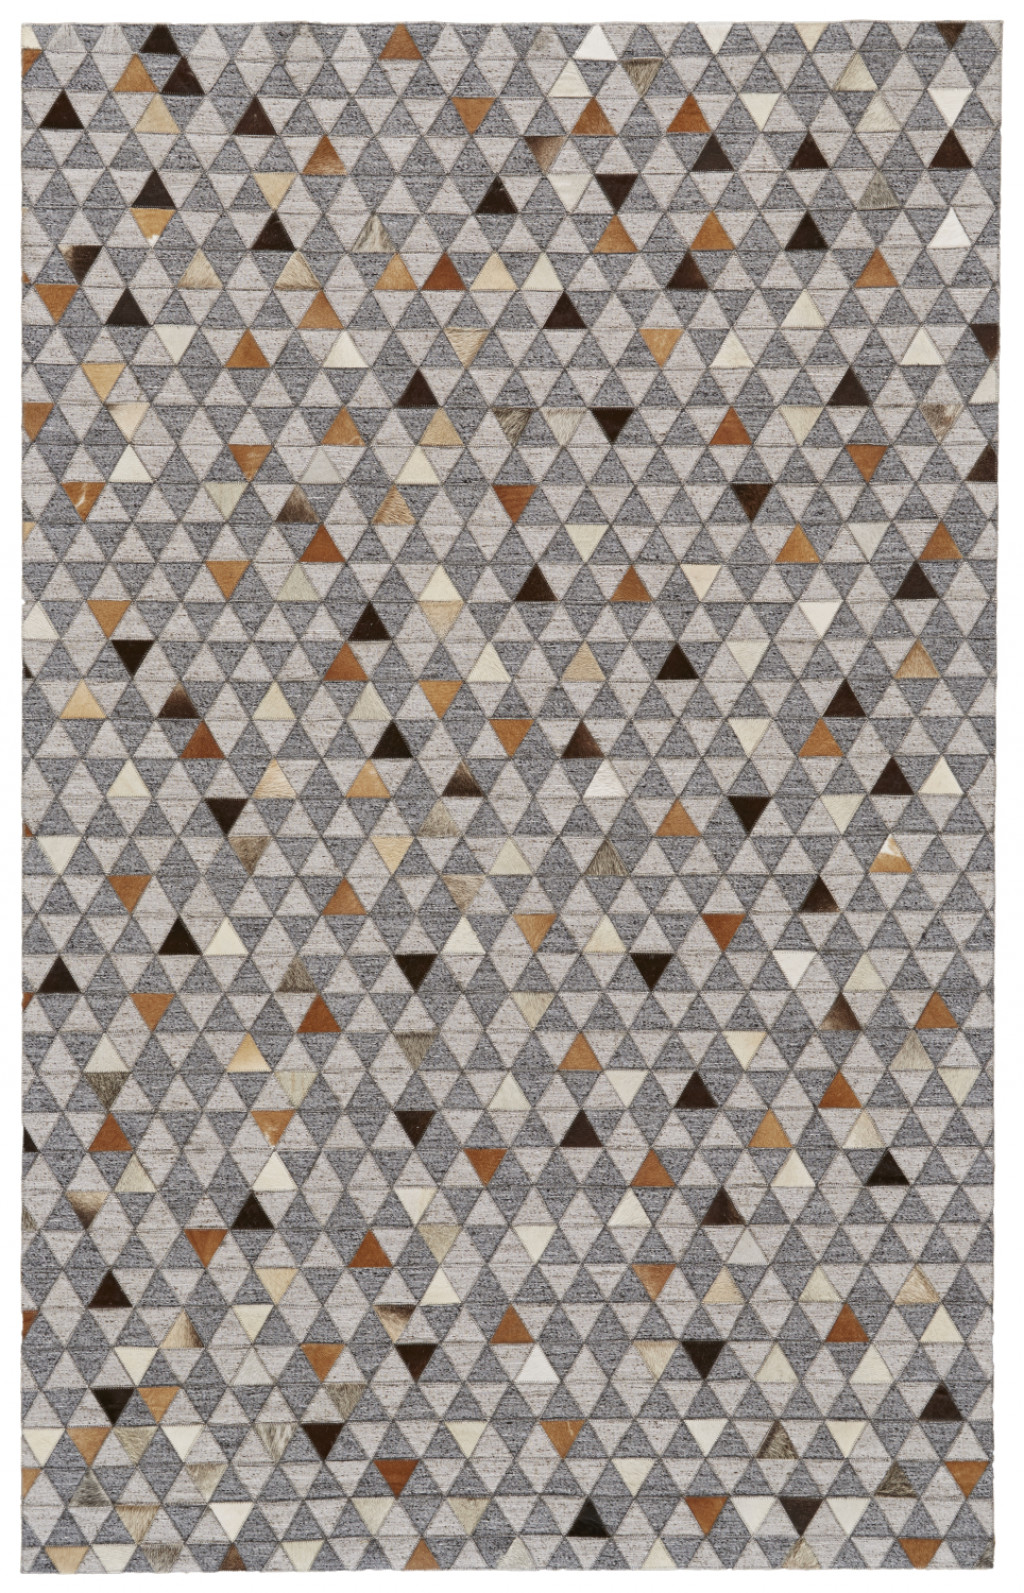 10' X 13' Gray Ivory And Brown Geometric Hand Woven Area Rug-511802-1